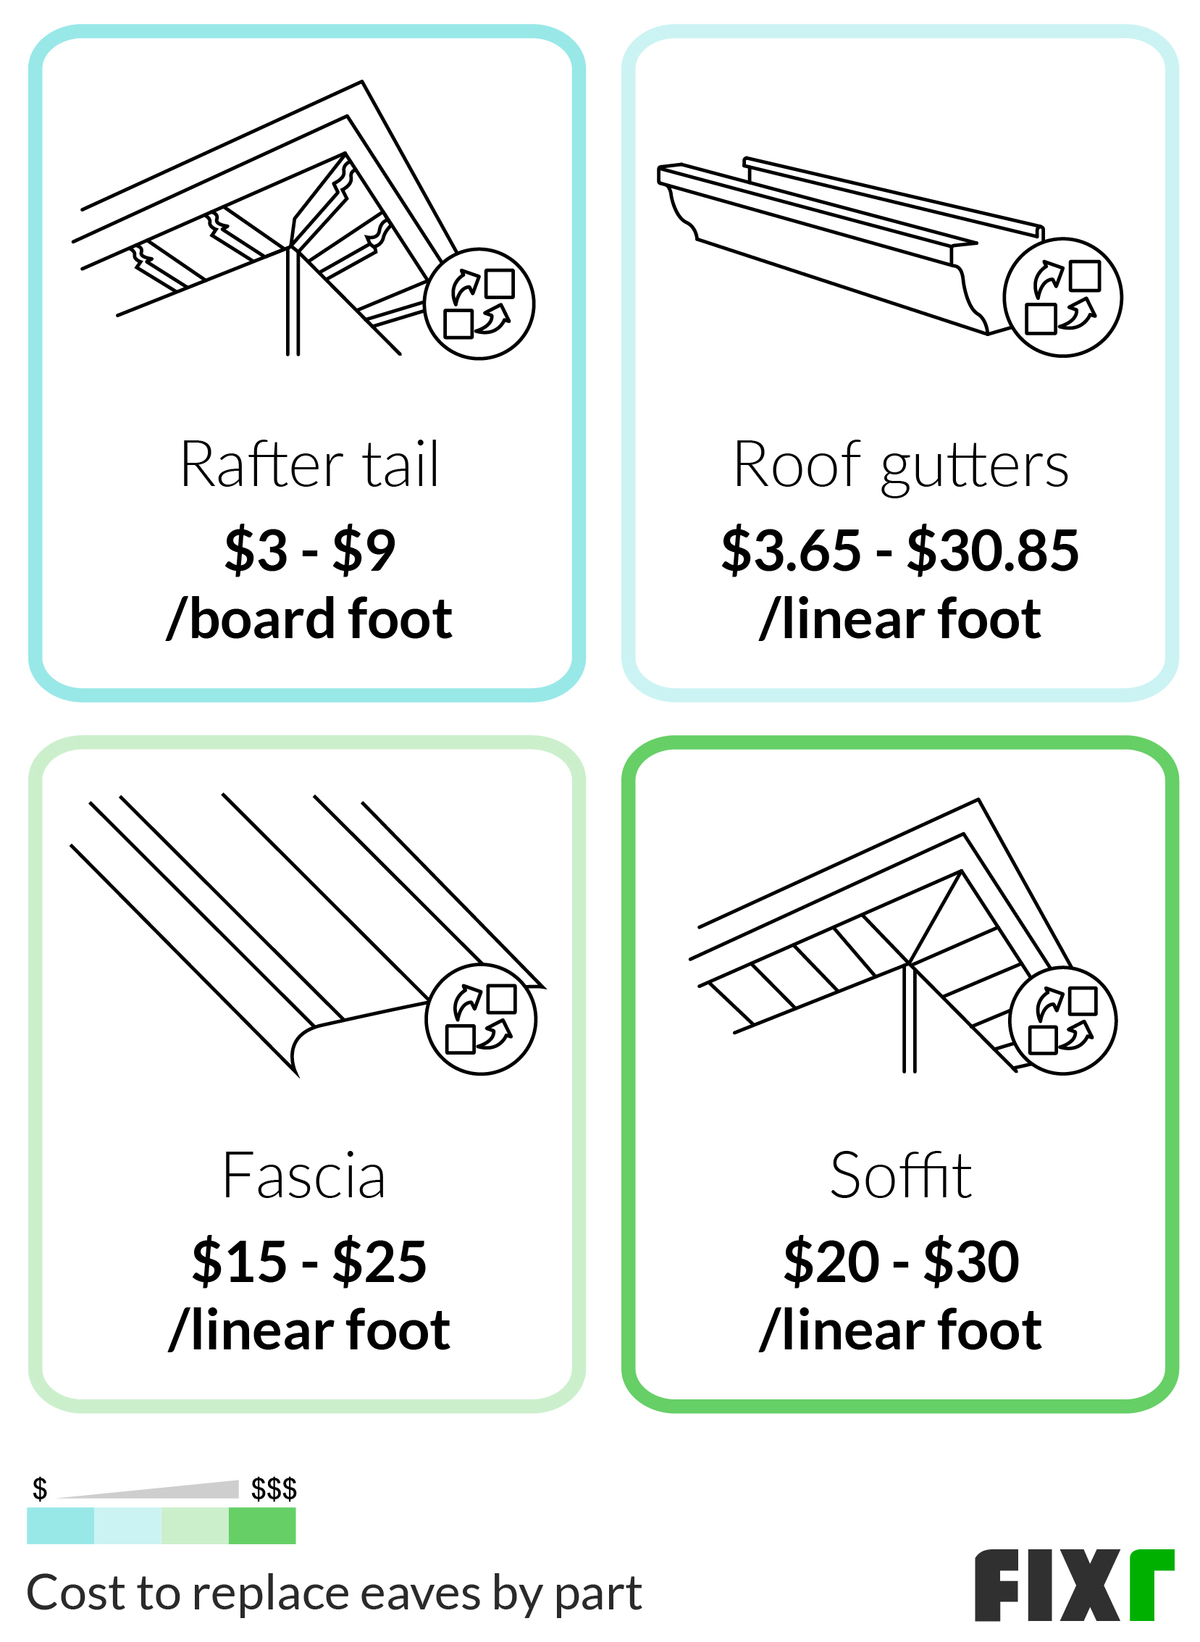 Cost to Replace Roof Eave Rafter Tail, Gutters, Fascia, and Soffit